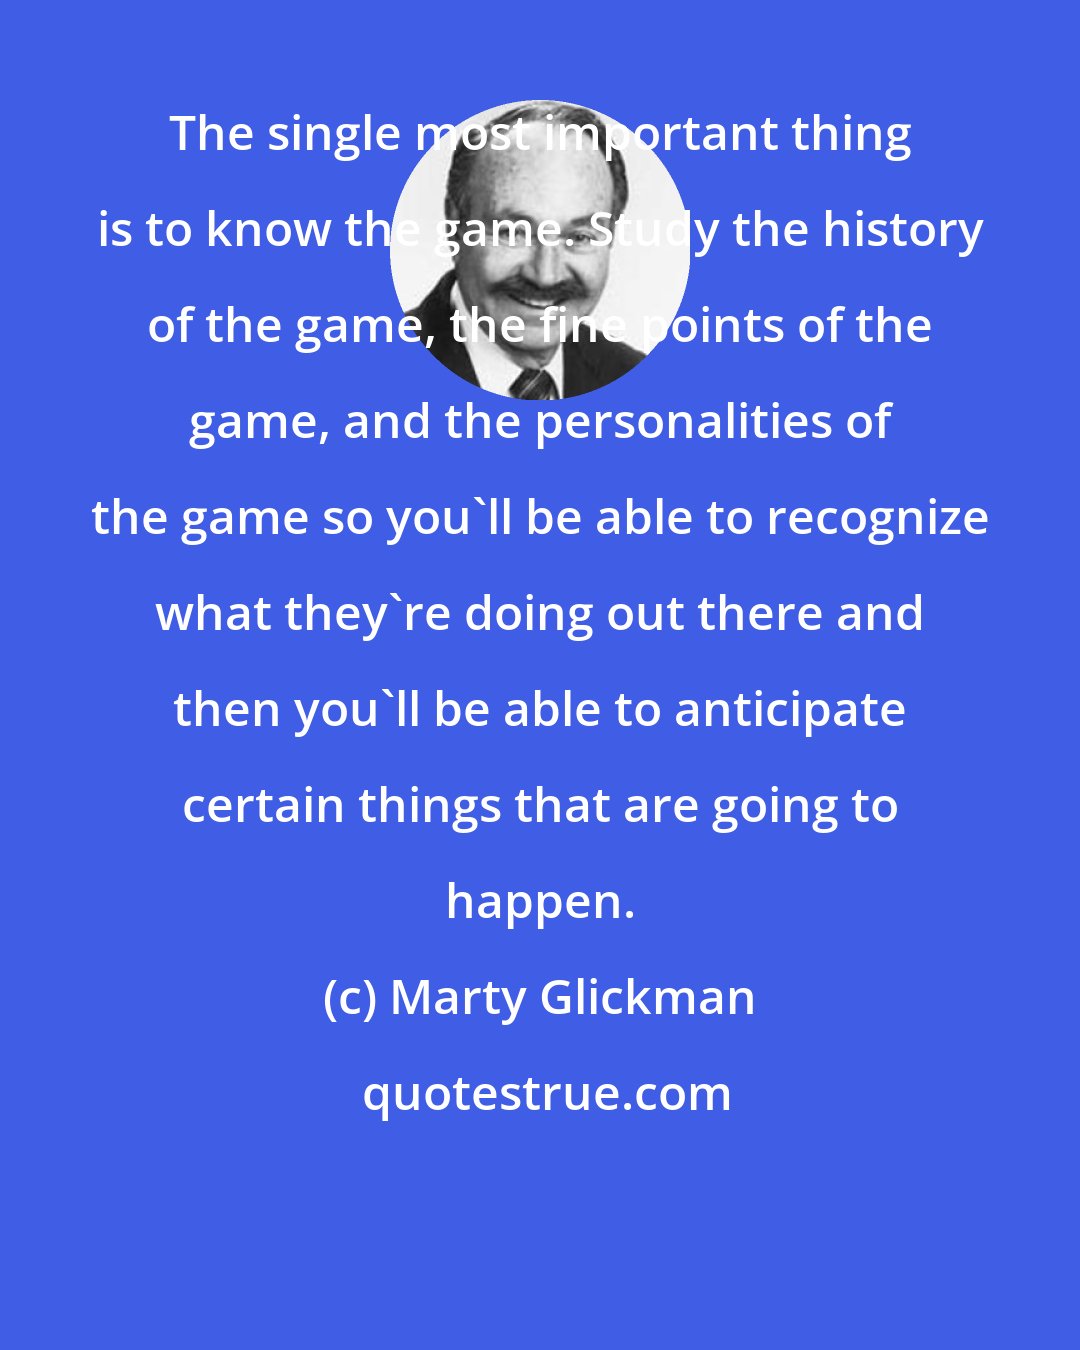 Marty Glickman: The single most important thing is to know the game. Study the history of the game, the fine points of the game, and the personalities of the game so you'll be able to recognize what they're doing out there and then you'll be able to anticipate certain things that are going to happen.